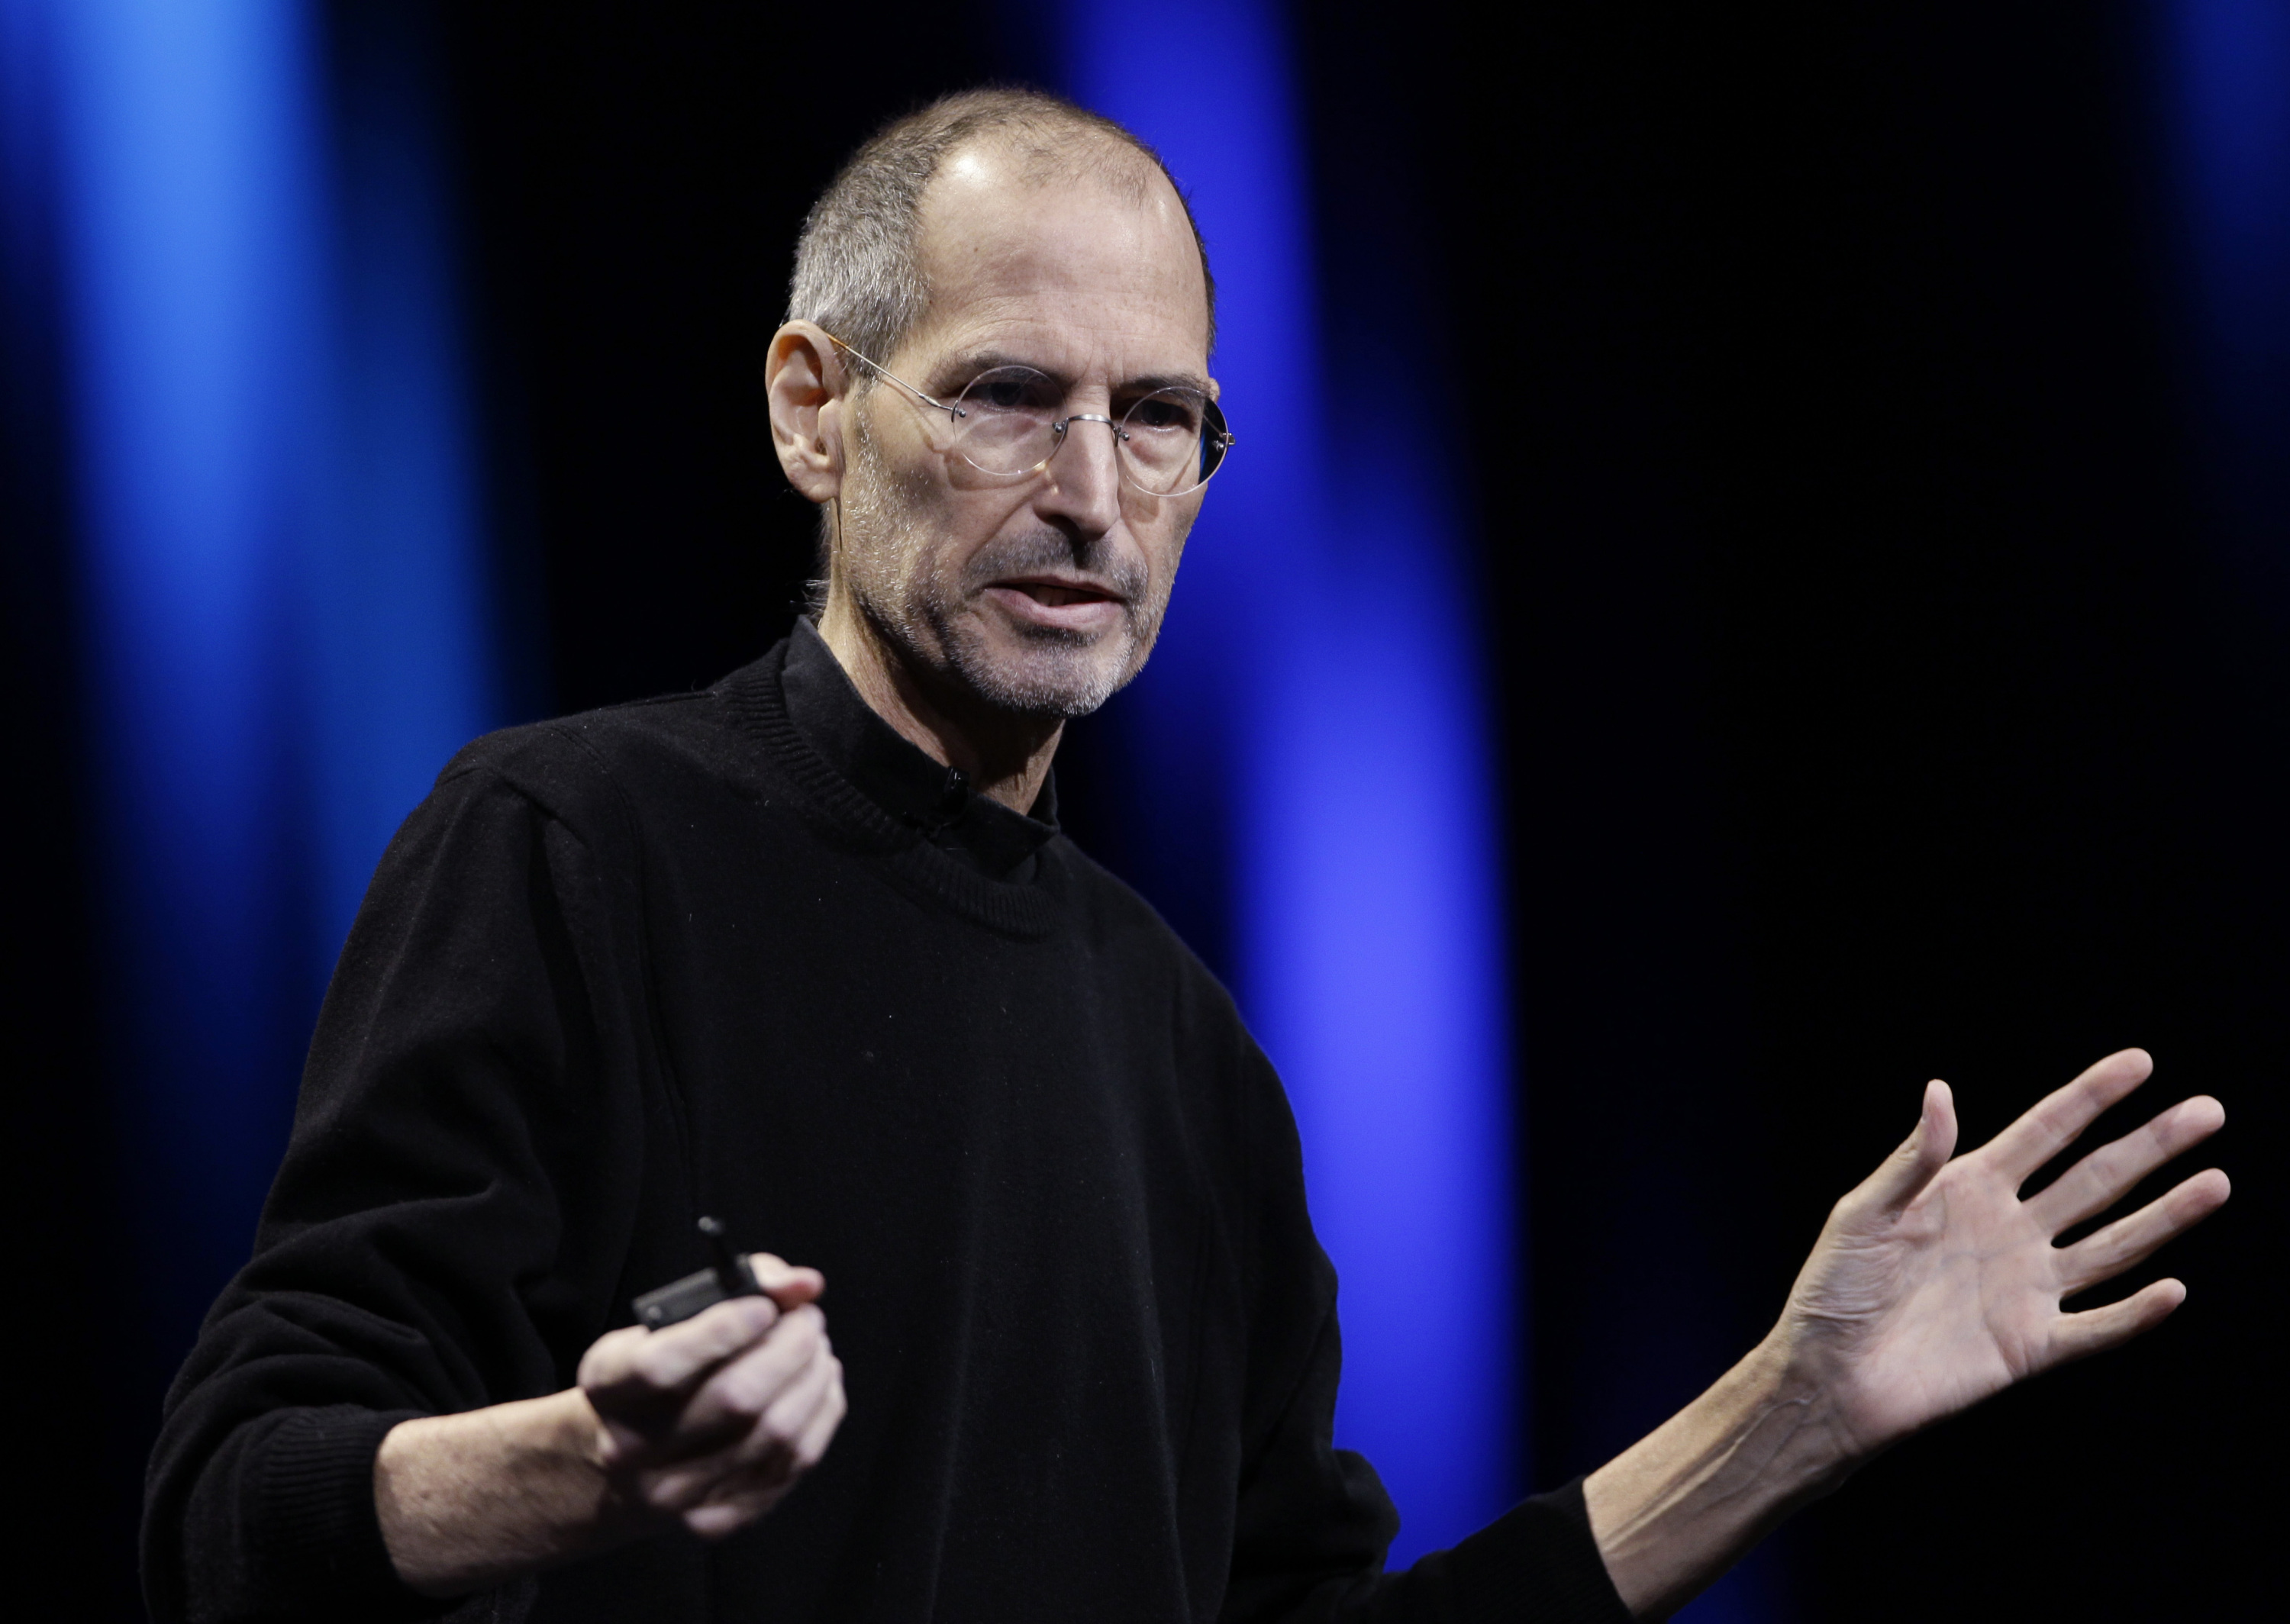 Apple CEO Steve Jobs delivering a keynote address to the Apple Worldwide Developers Conference in San Francisco on June 6, 2011.